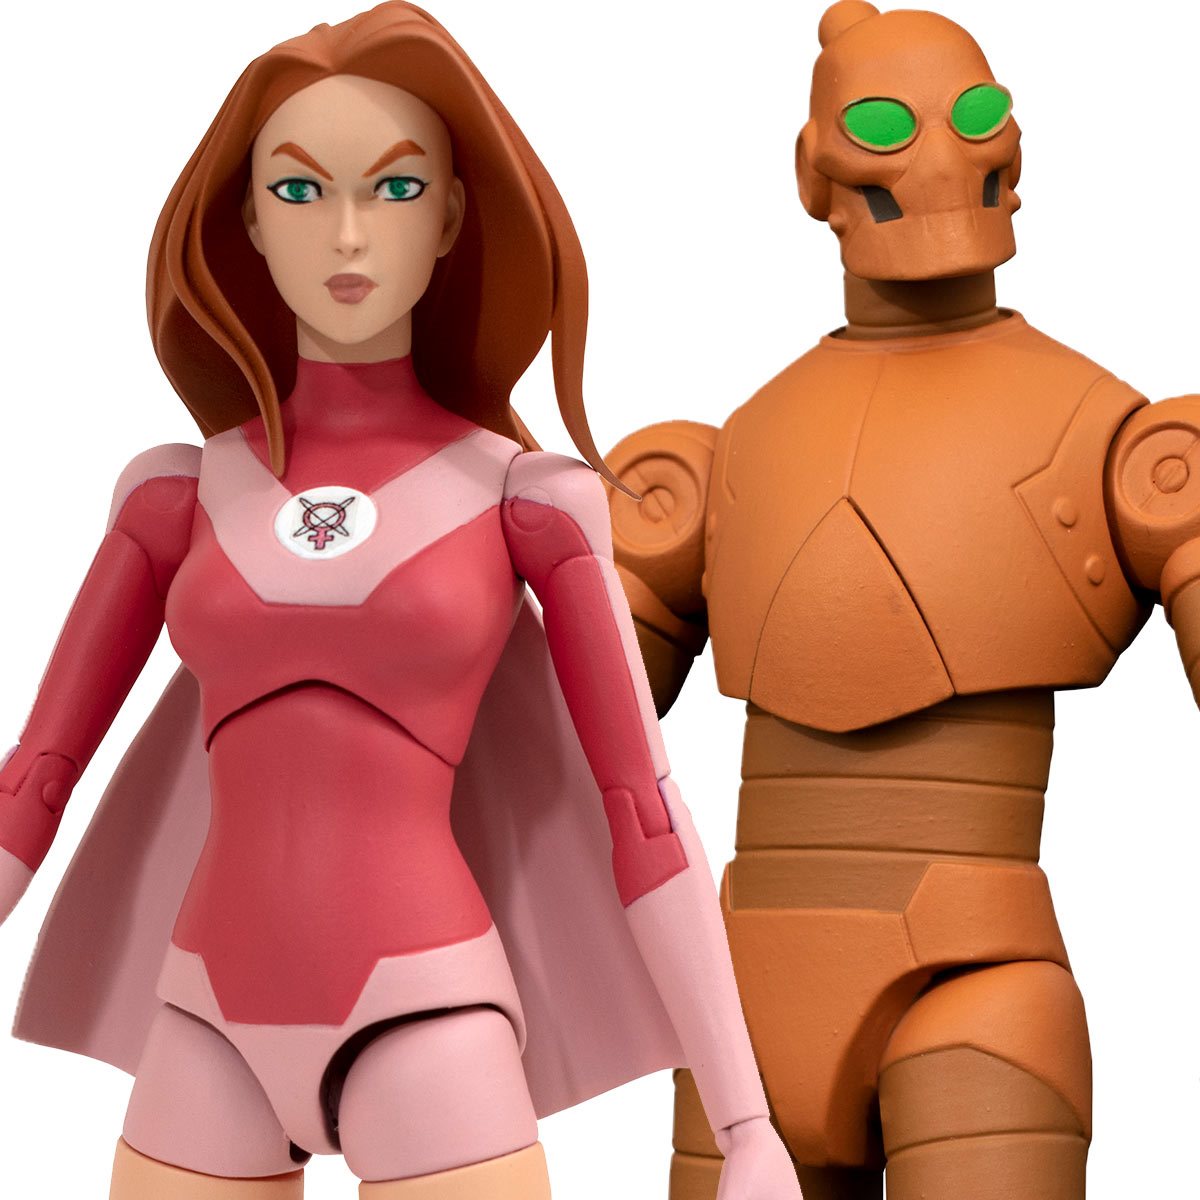 Invincible Deluxe Action Figures Series 2 : Atom Eve and Robot